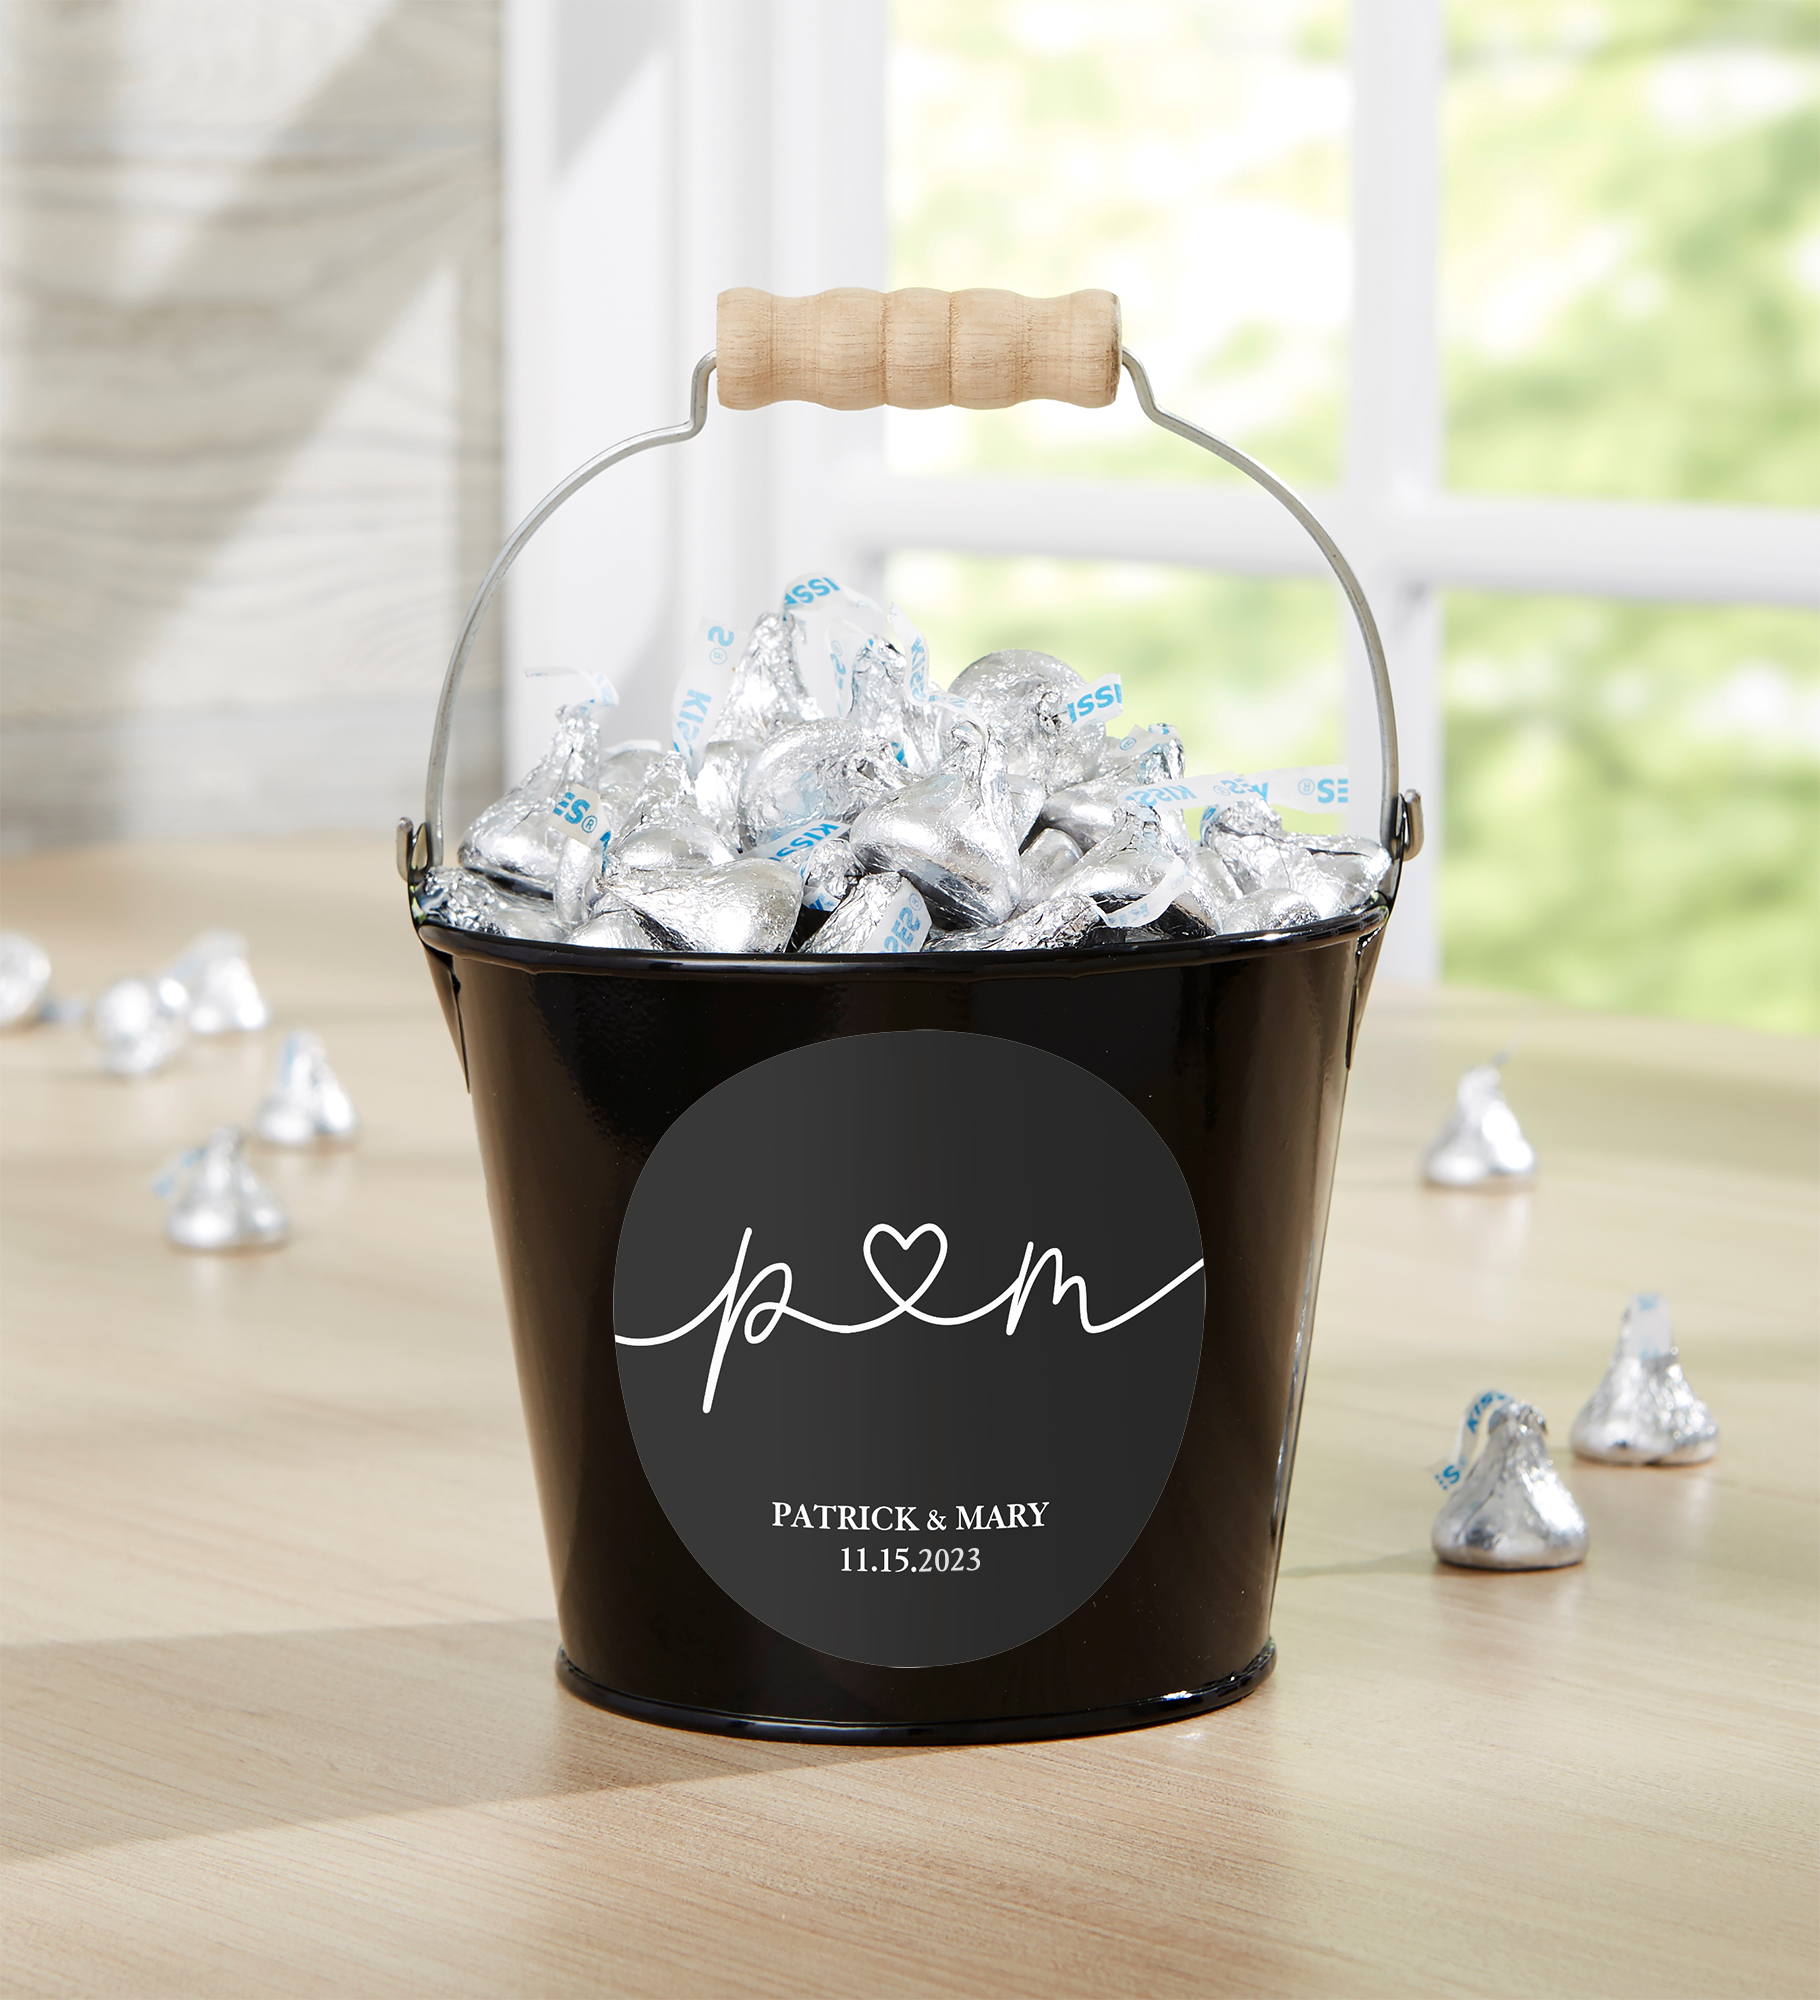 Drawn Together By Love Personalized Metal Bucket